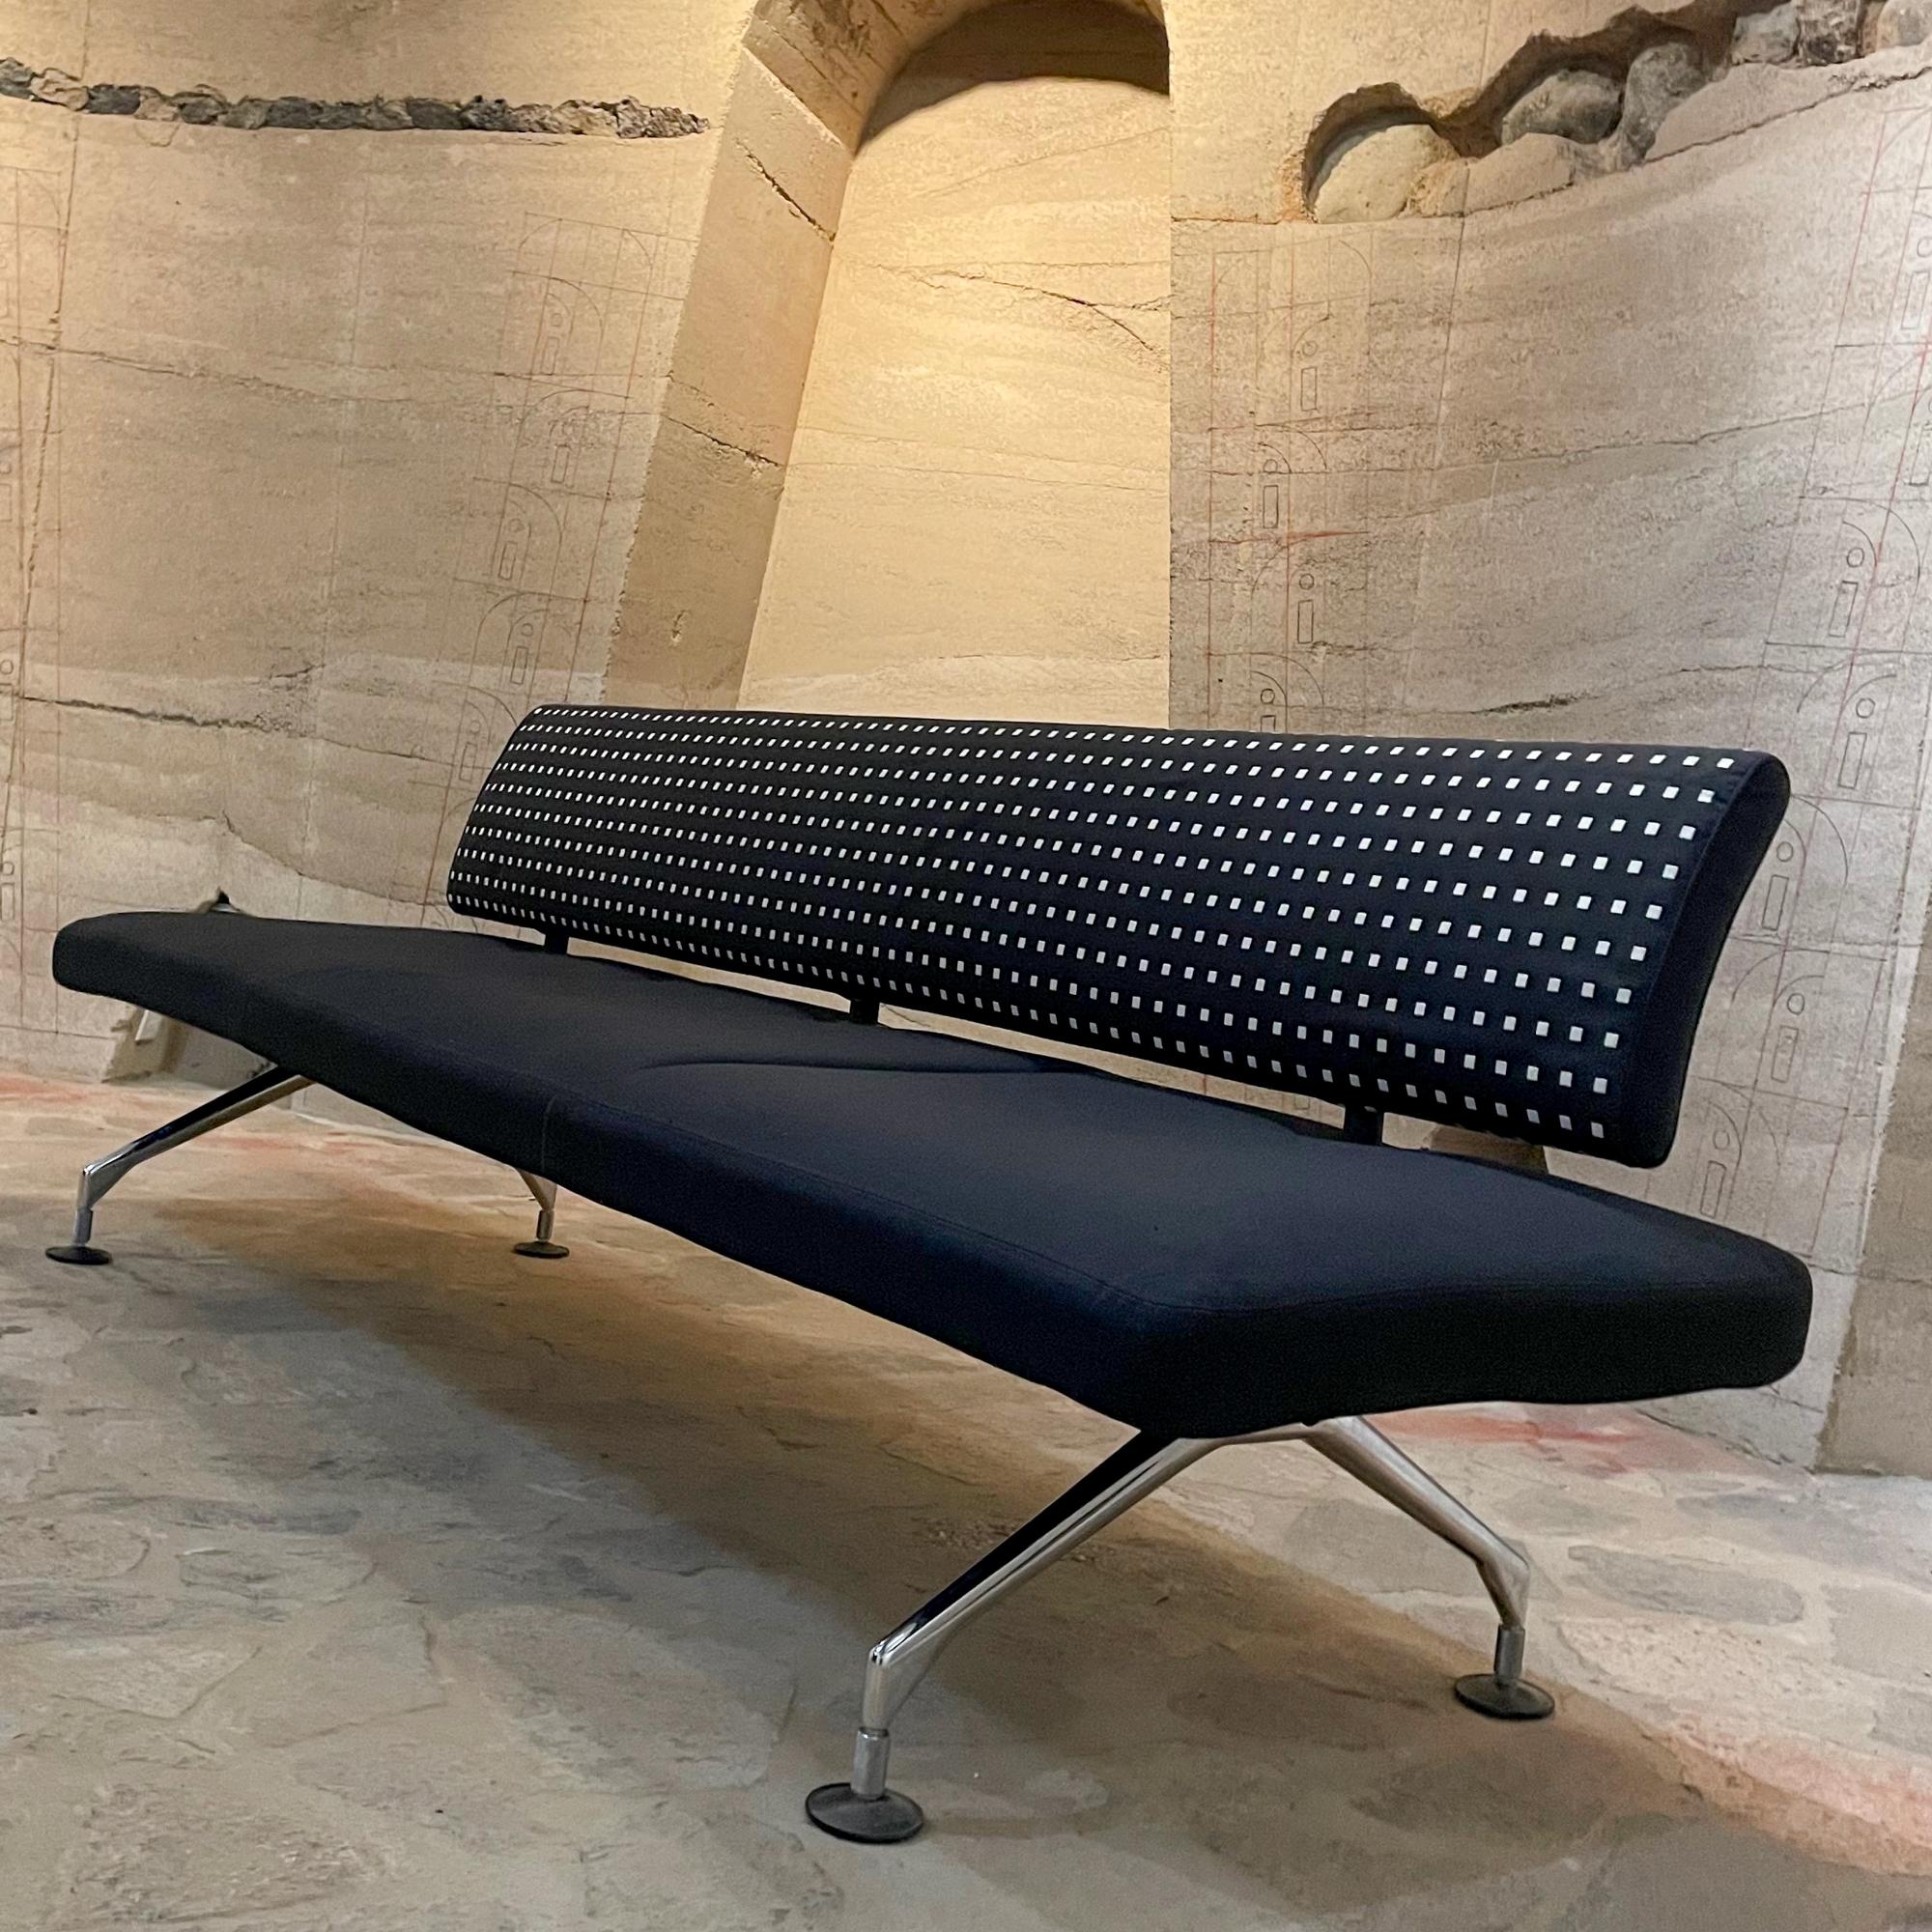 Vintage modern three seater sofa on cast aluminum frame by architect and Italian designer, Antonio Citterio for VITRA 1990s
Sculptural Clean and very comfortable design. Black fabric.
Measures: 88 W x 31 T x 27 D x seat H 17 inches
German